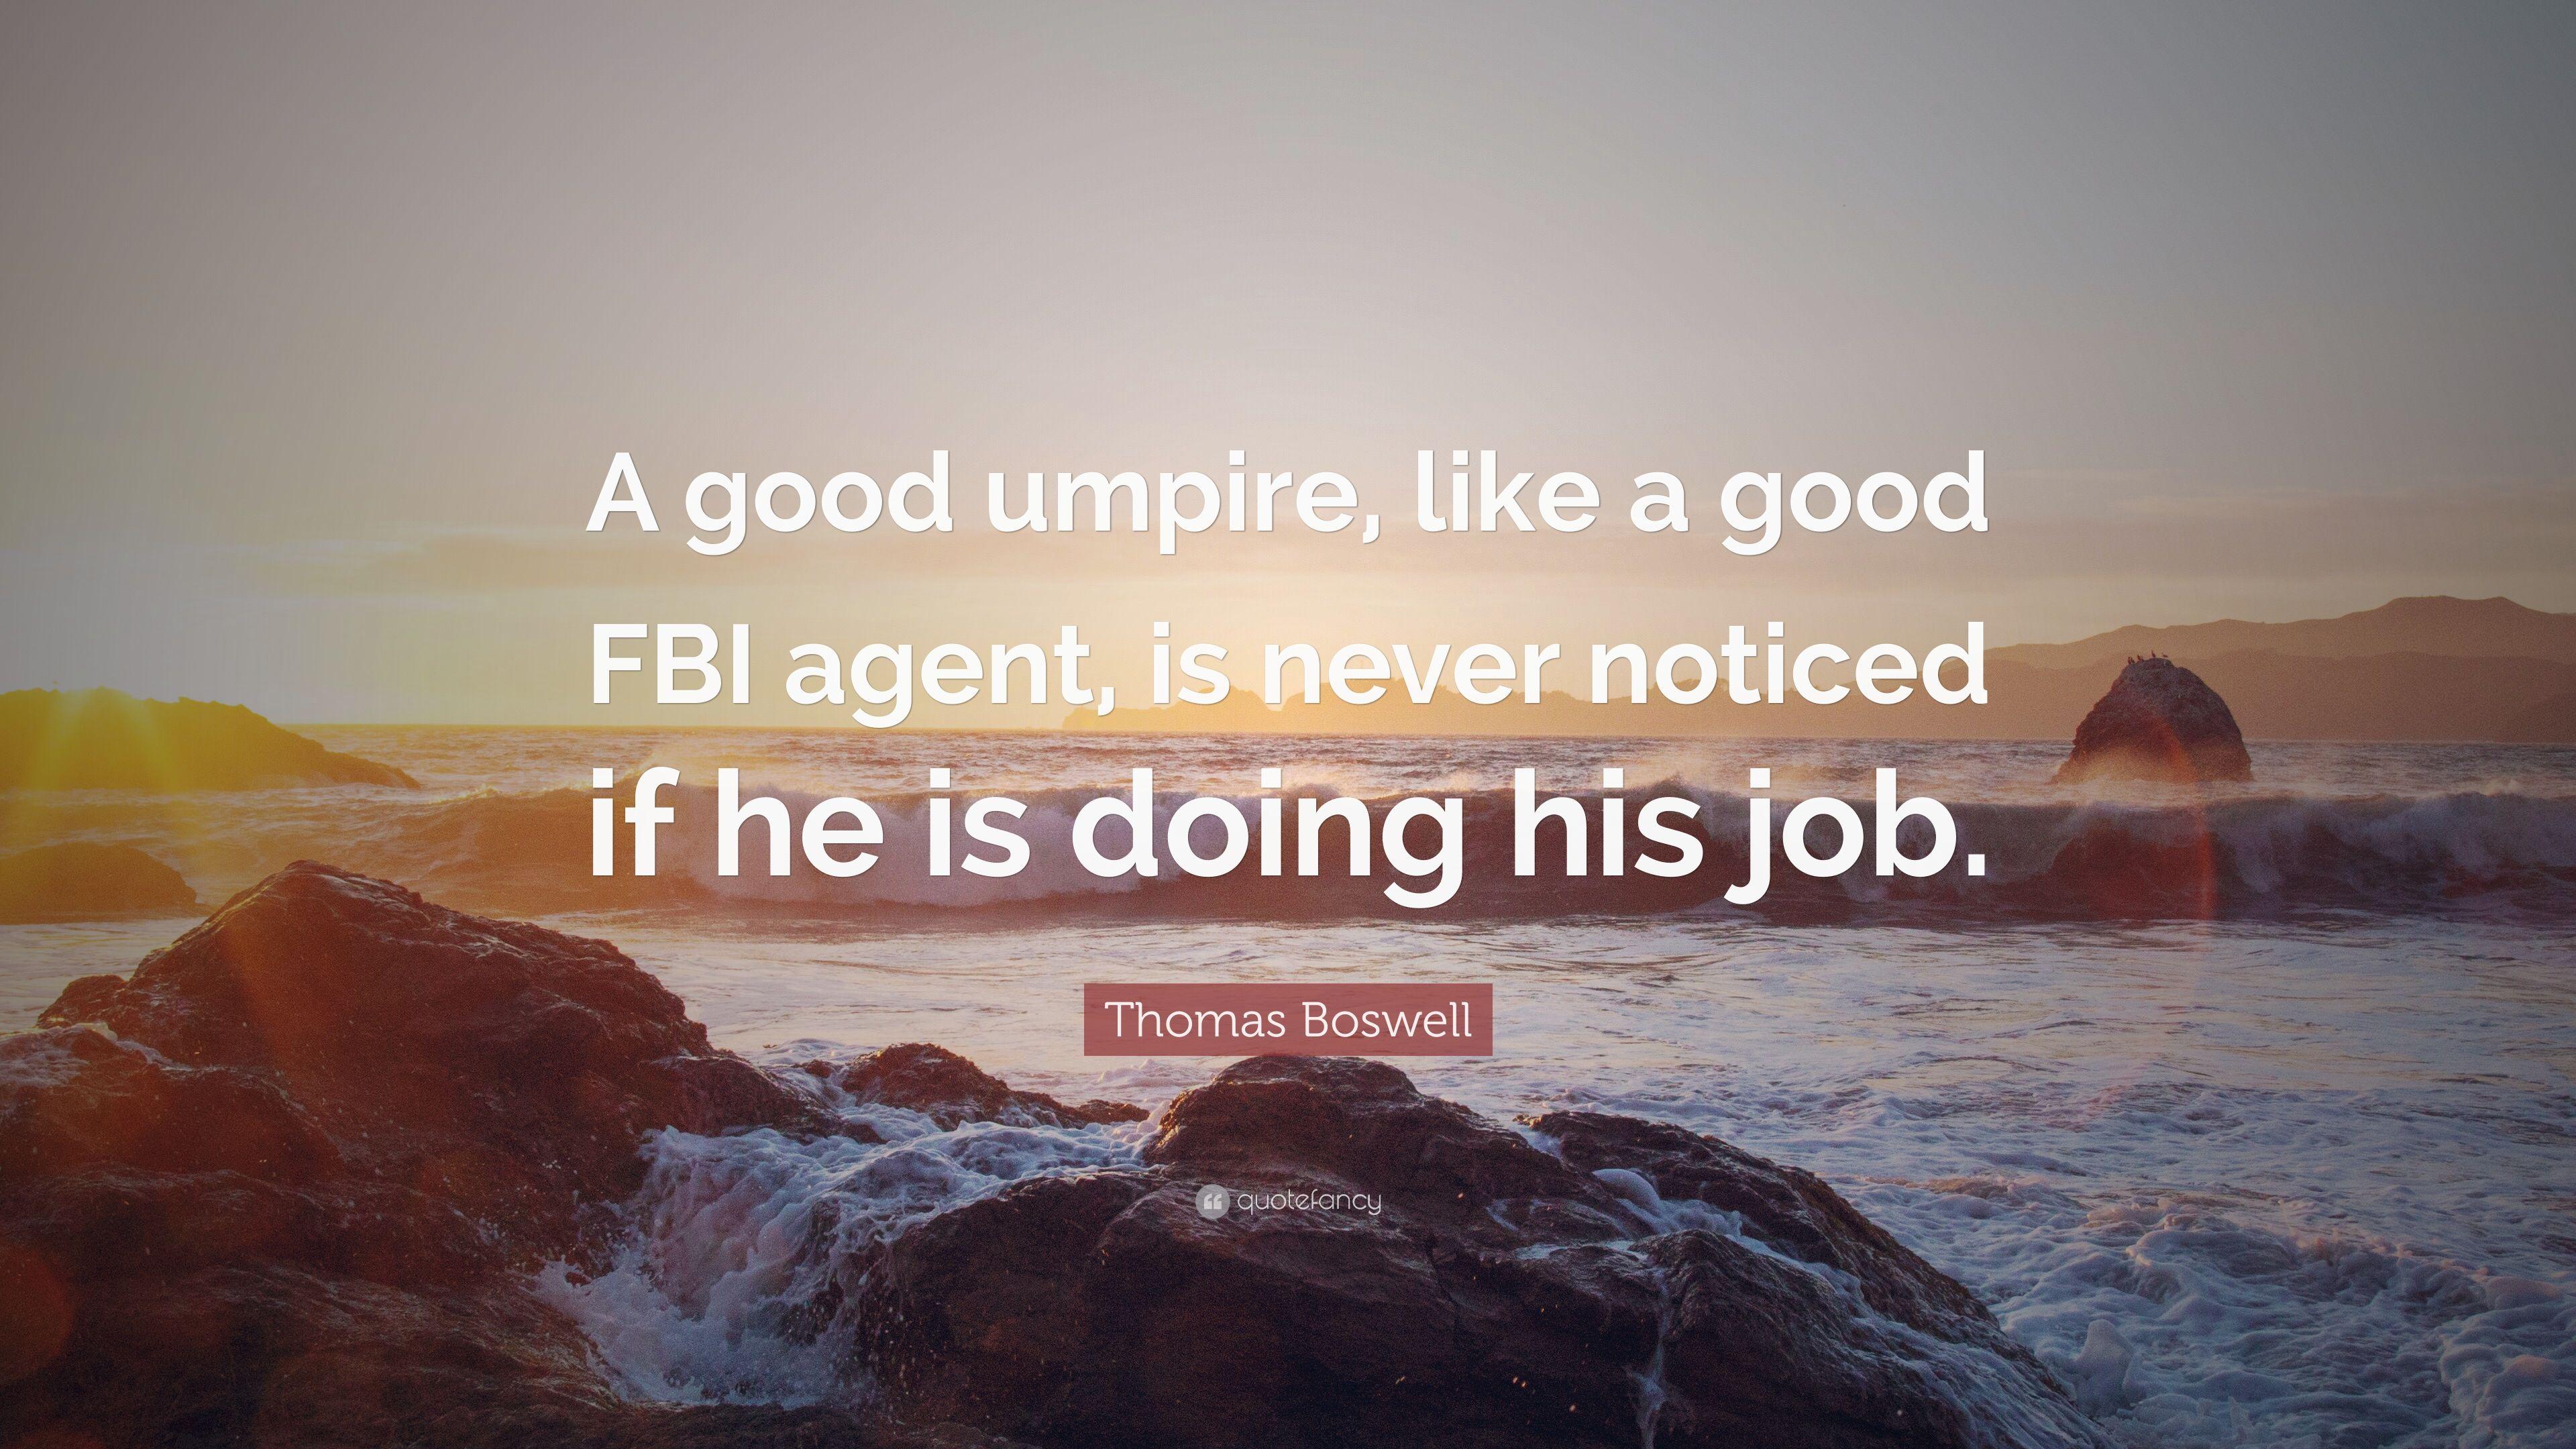 Thomas Boswell Quote: “A good umpire, like a good FBI agent